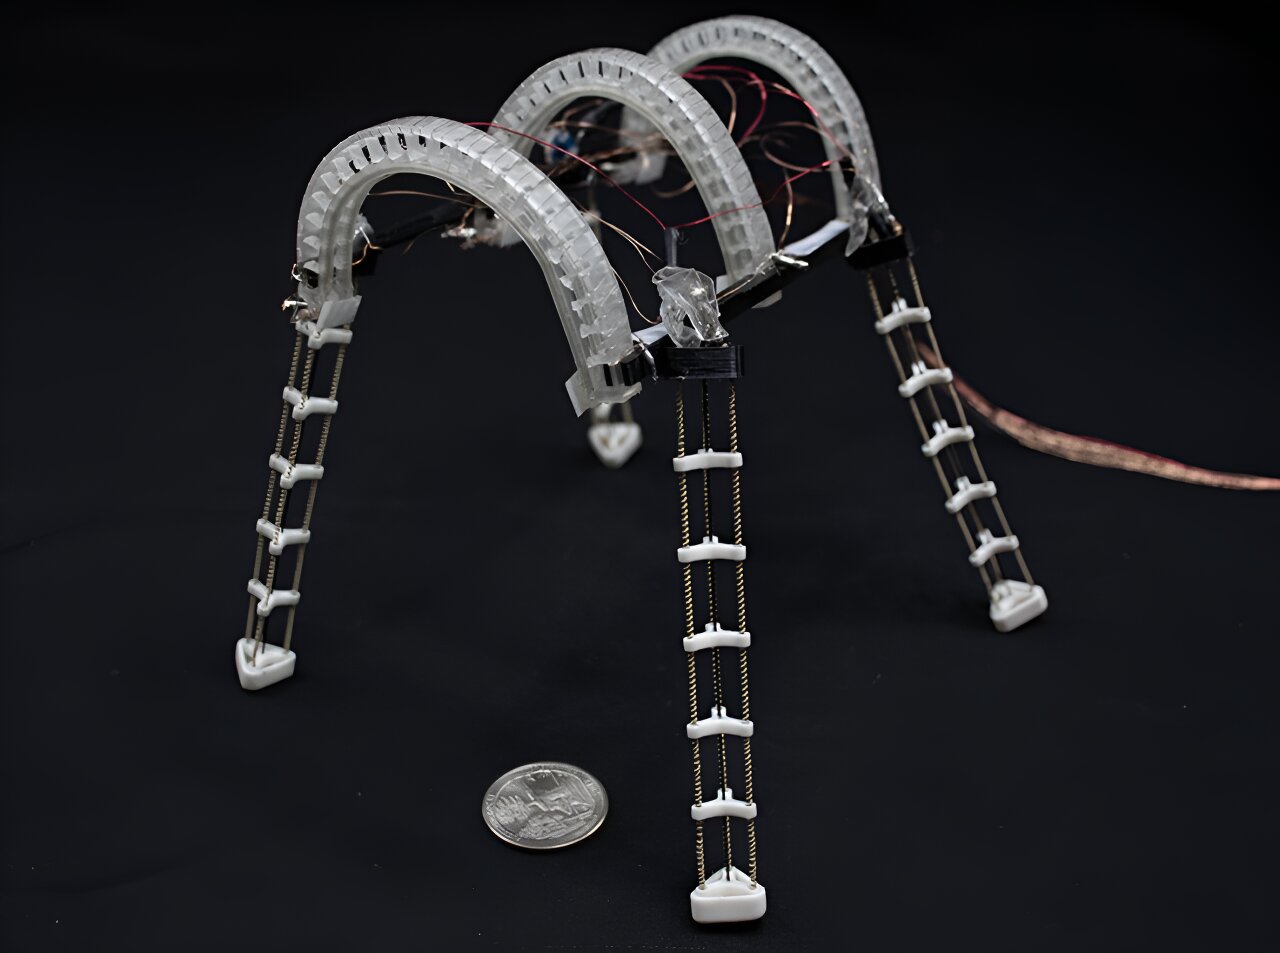 Morphing robots can grip, climb and crawl like insects